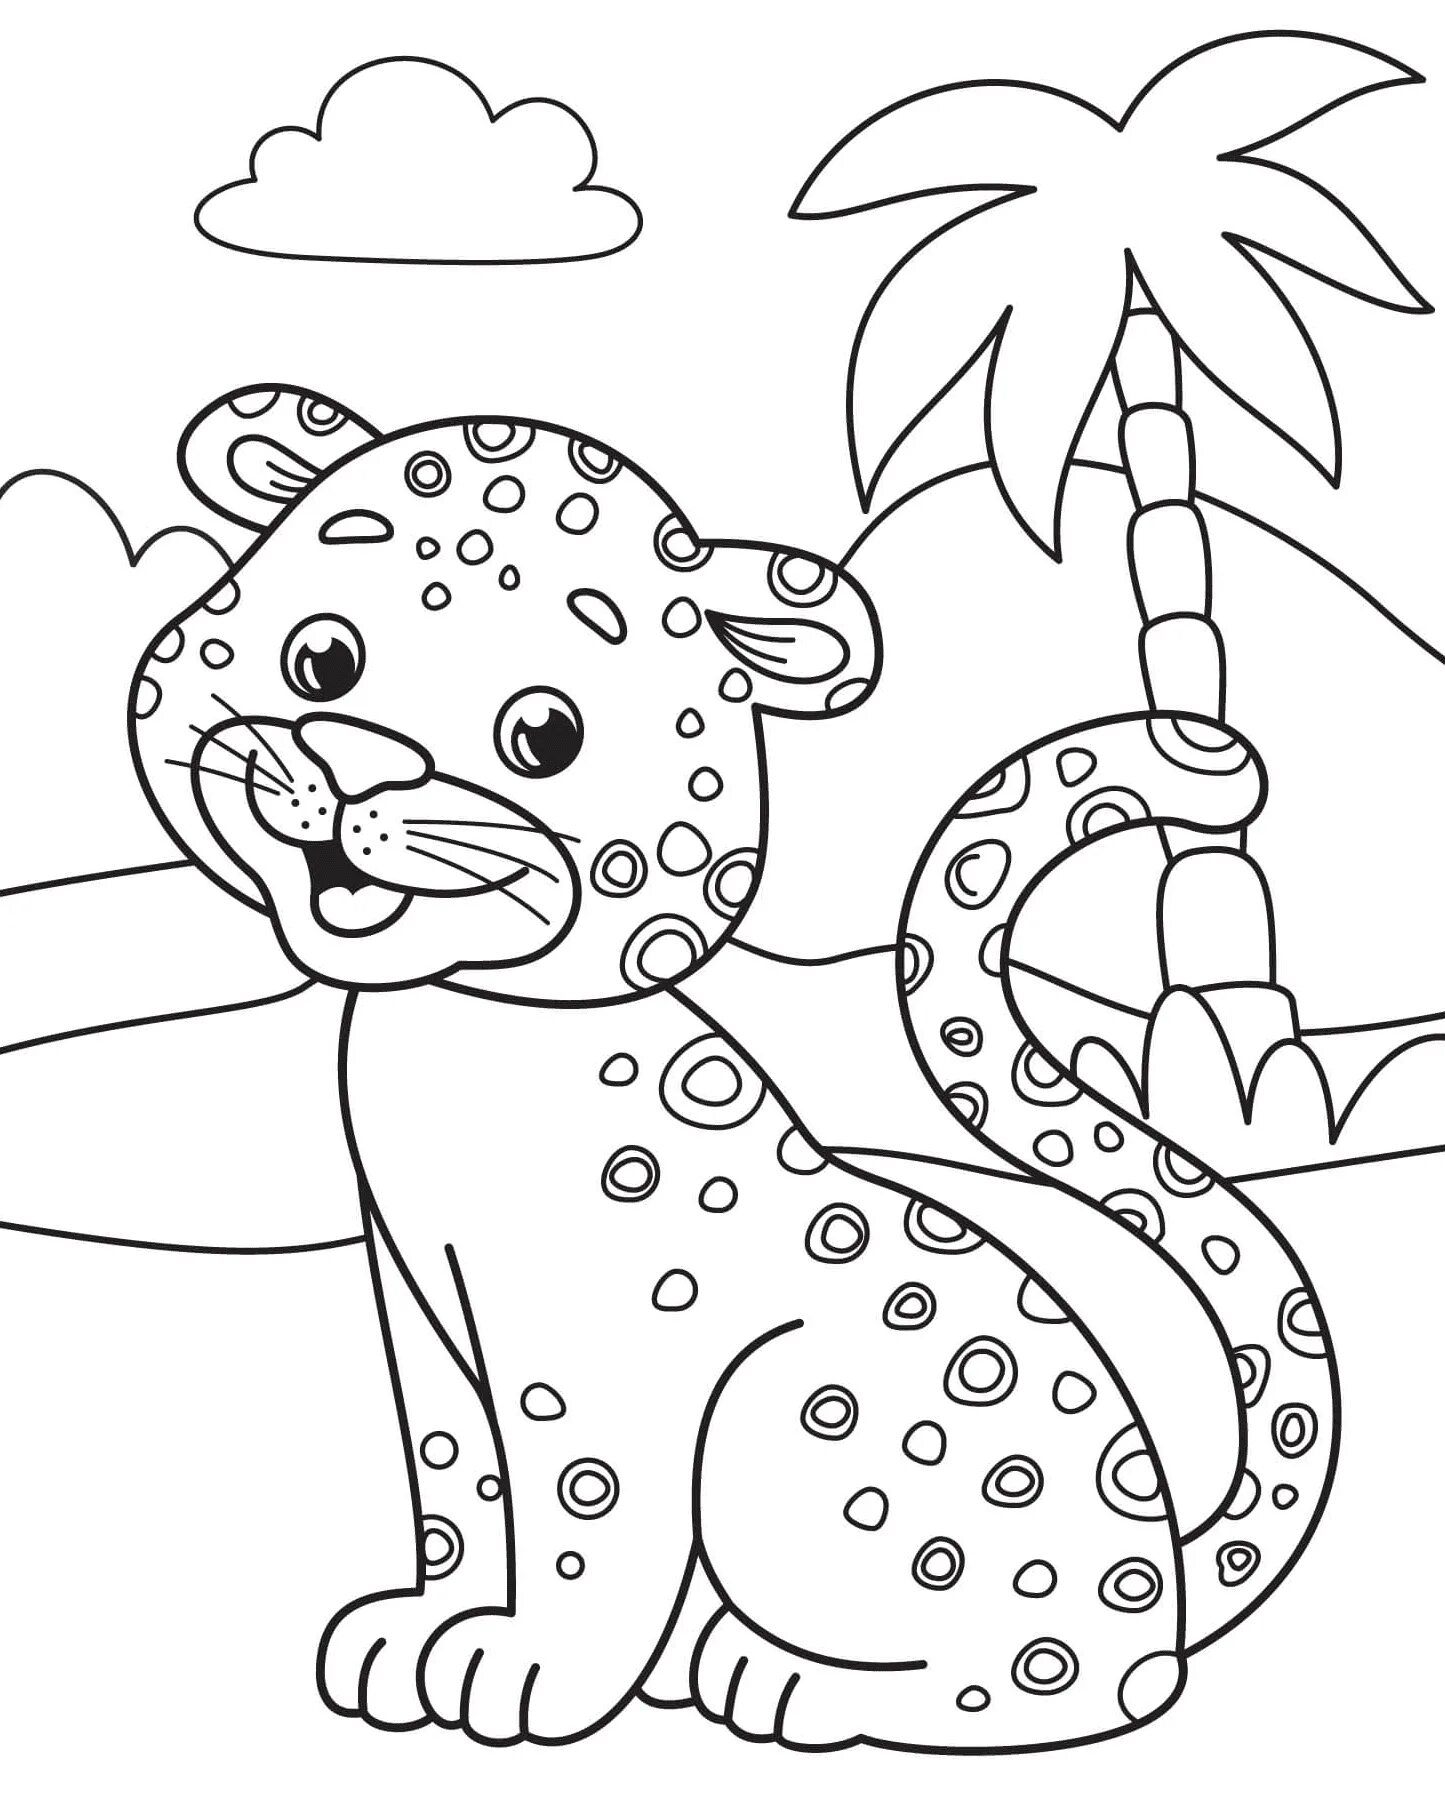 Coloring page nice leopard